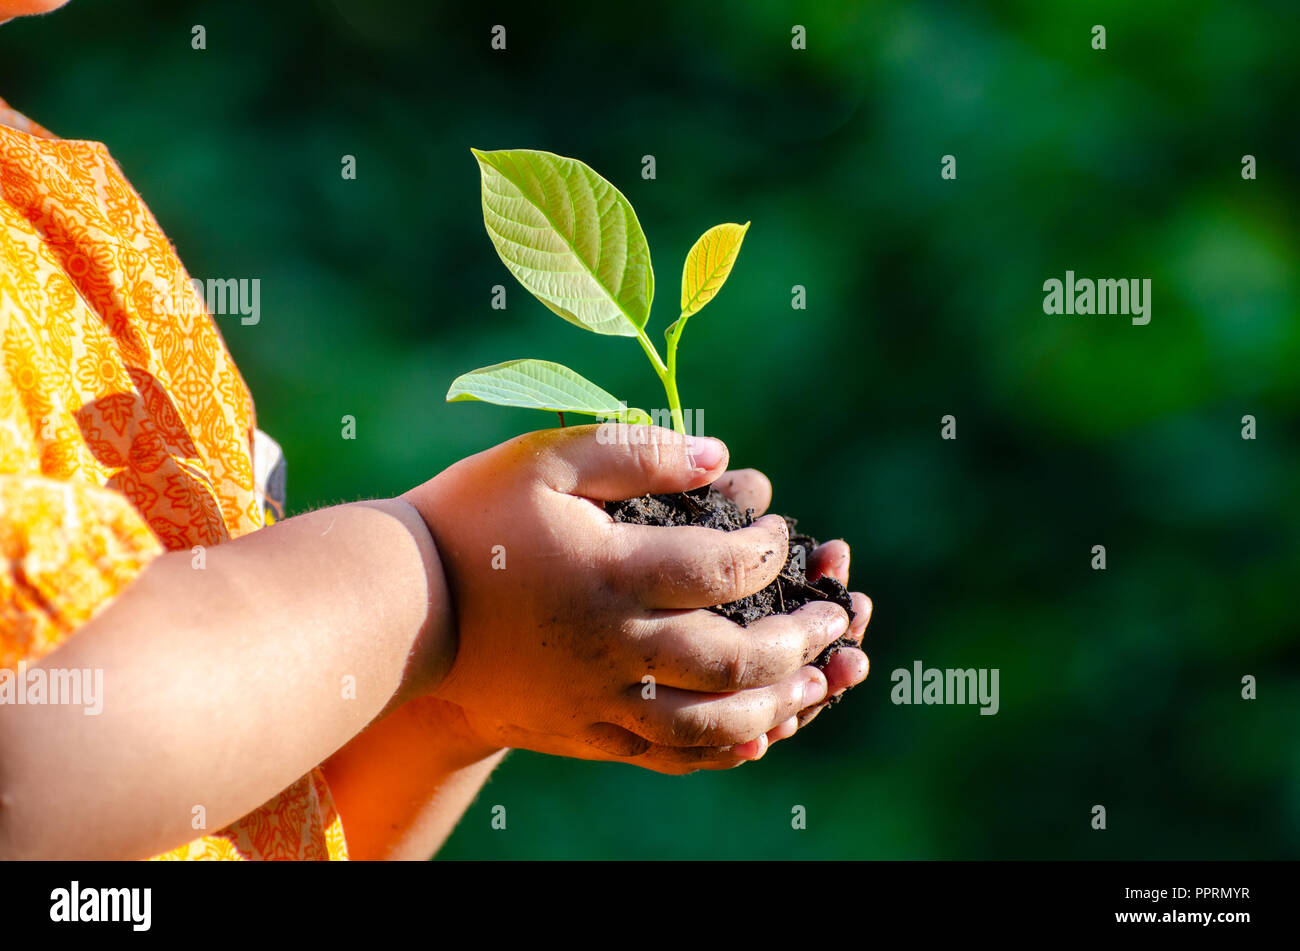 tree sapling Baby Hand On the dark ground, the concept implanted children's consciousness into the environment Stock Photo